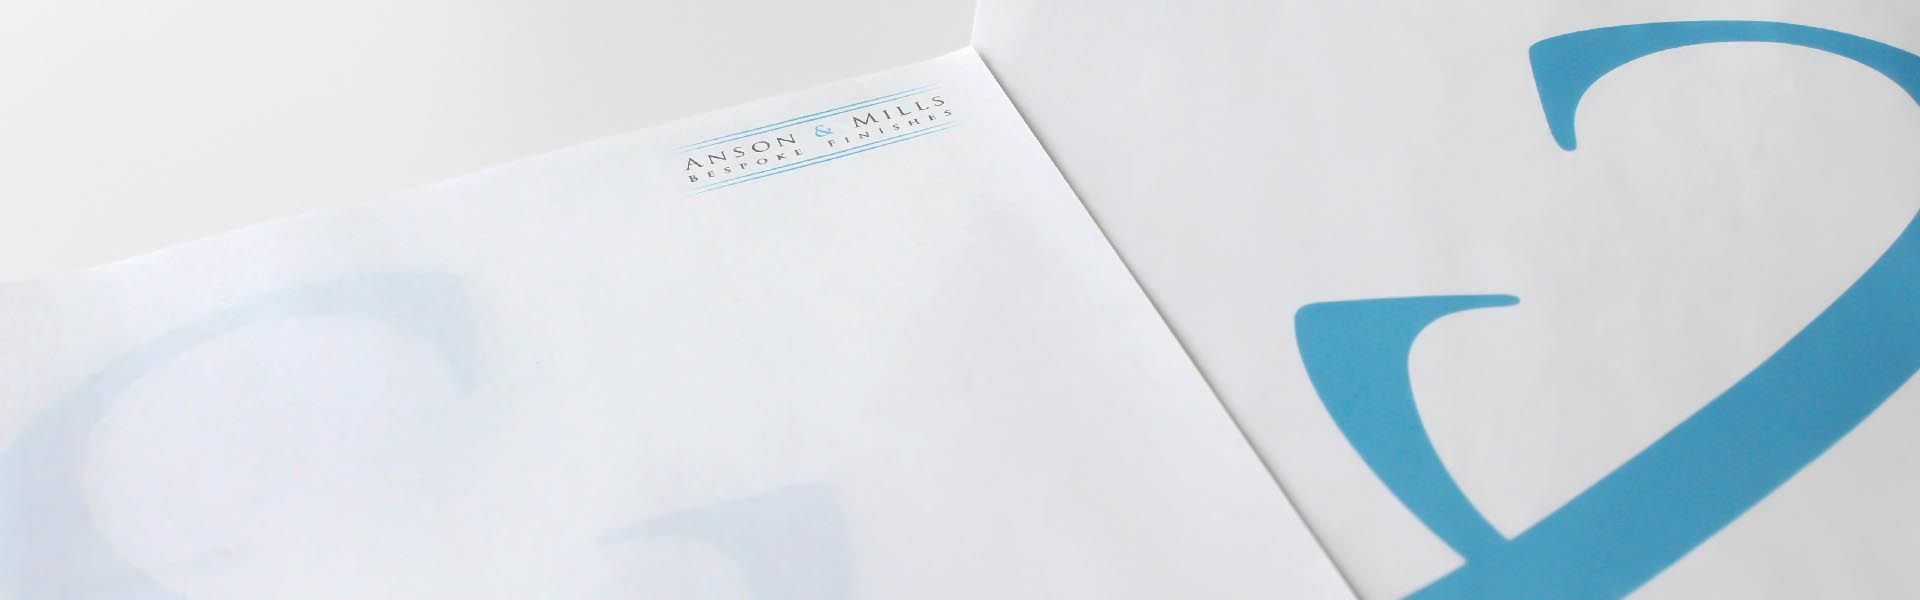 A close up of a piece of paper with the anson and mills logo on it.